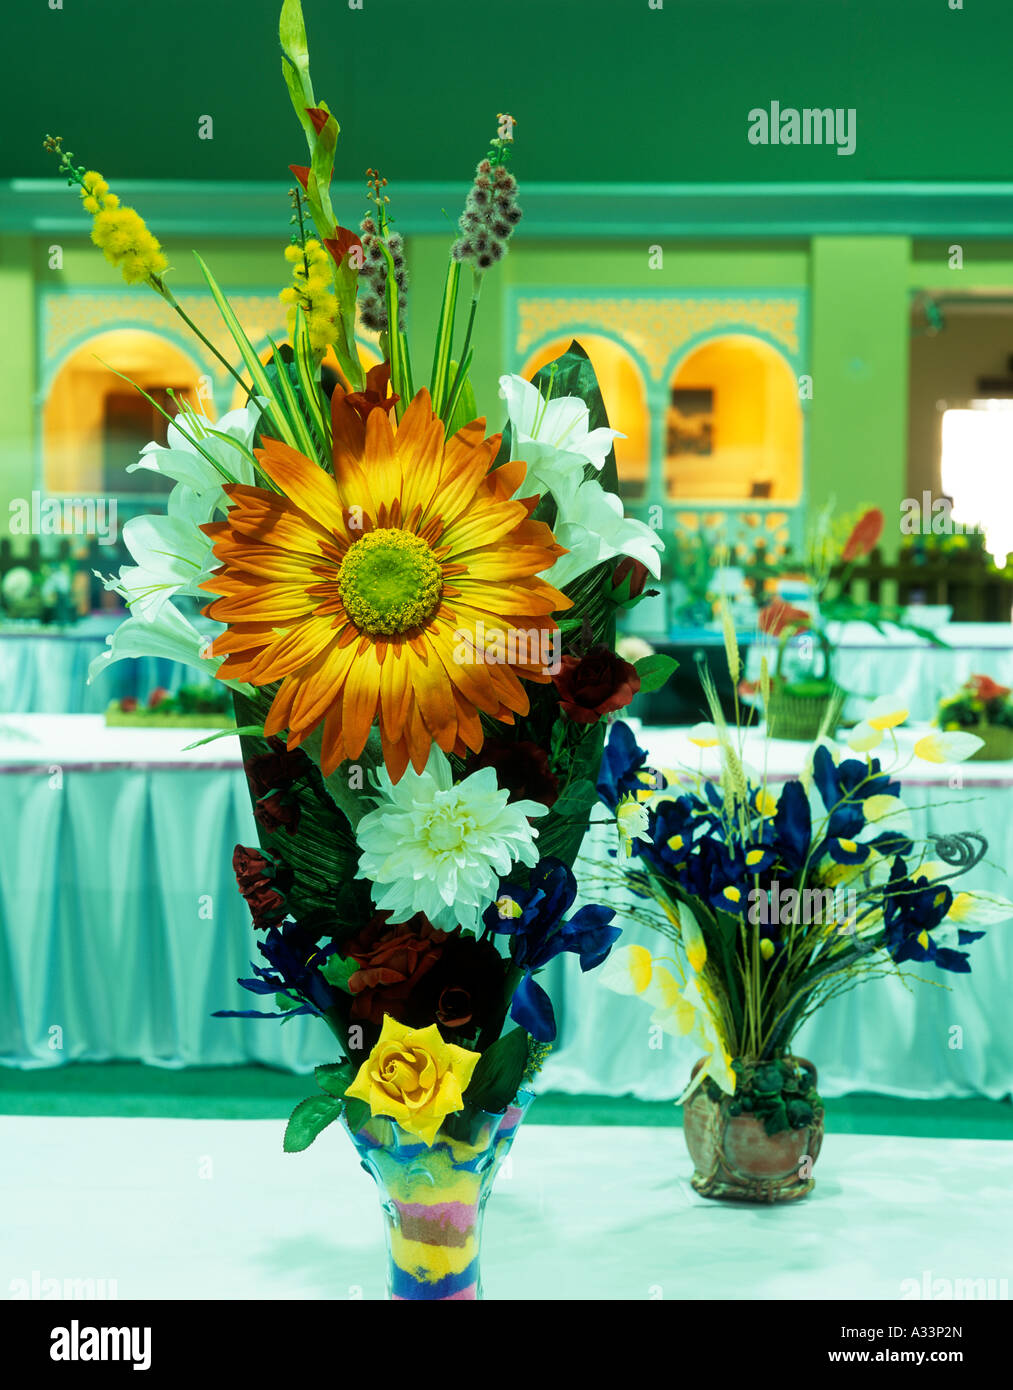 EXHIBITION OF FLOWERS AT INTERNATIONAL CONVENTION CENTRE DOHA QATAR Stock Photo